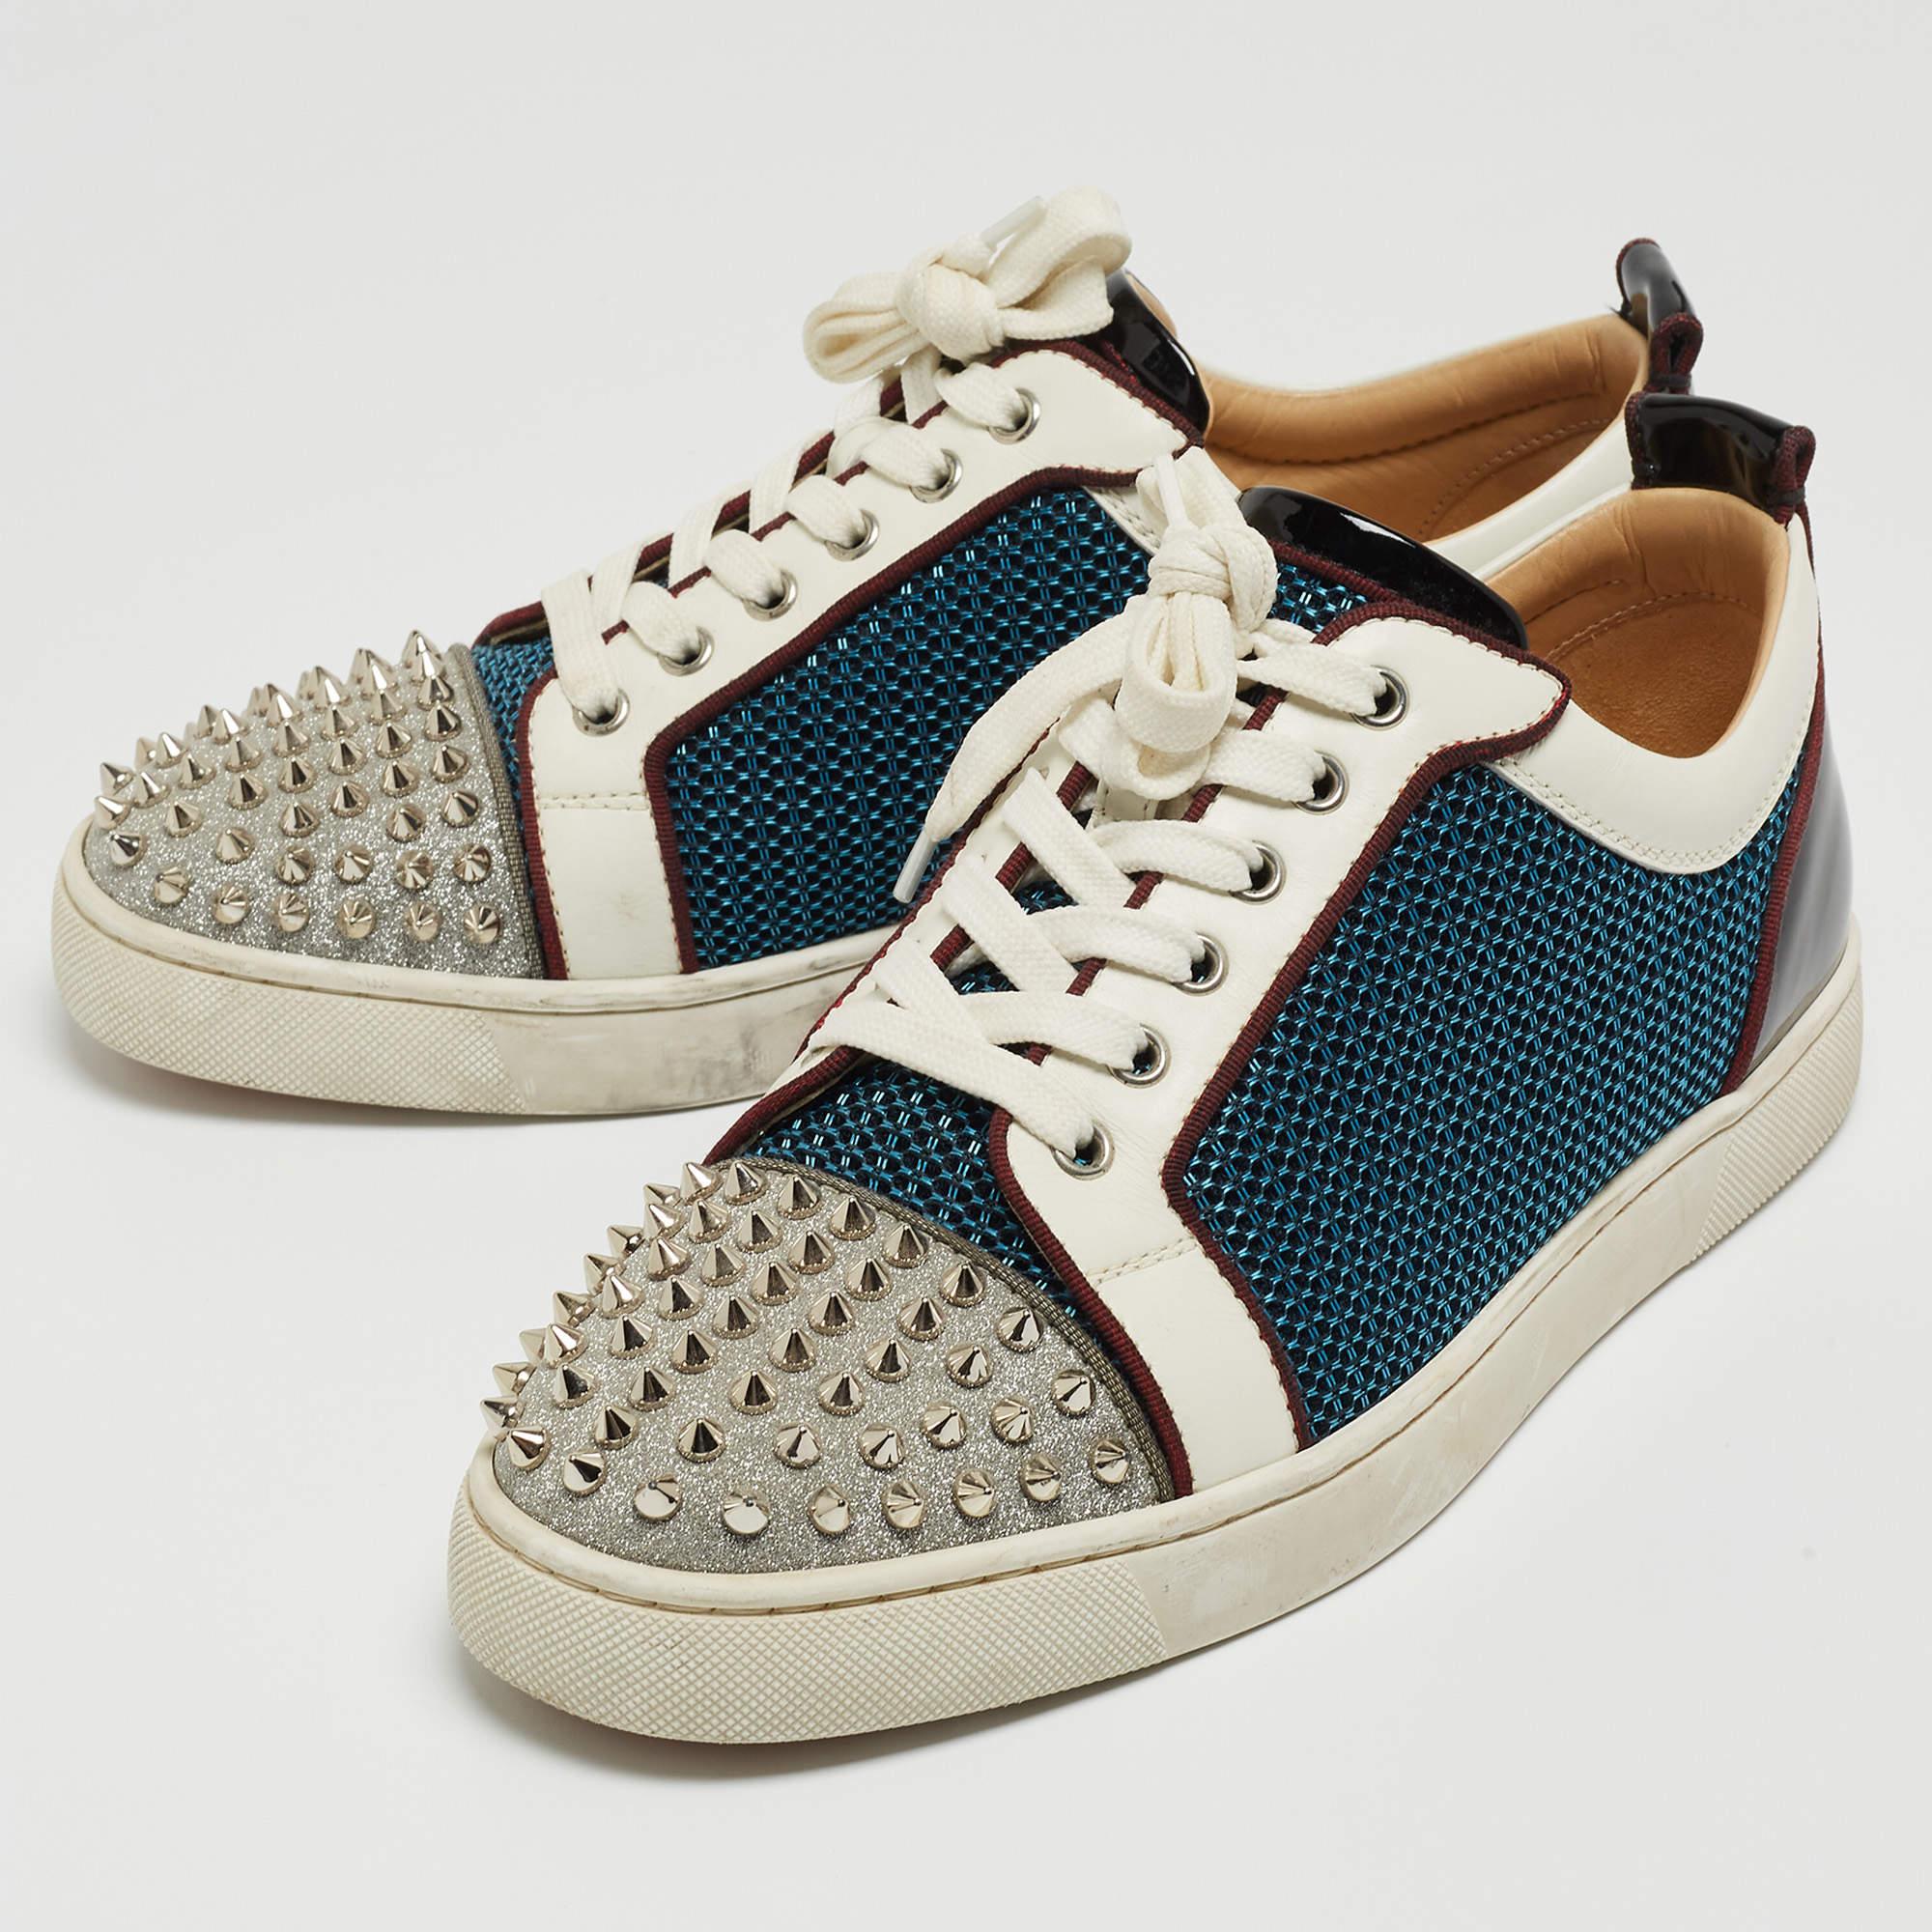 You'll leave your friends amazed every time you step out in these Louis Junior sneakers from Christian Louboutin! These sneakers are crafted from mesh along with leather and feature round toes with trendy spikes detailed on them. They flaunt